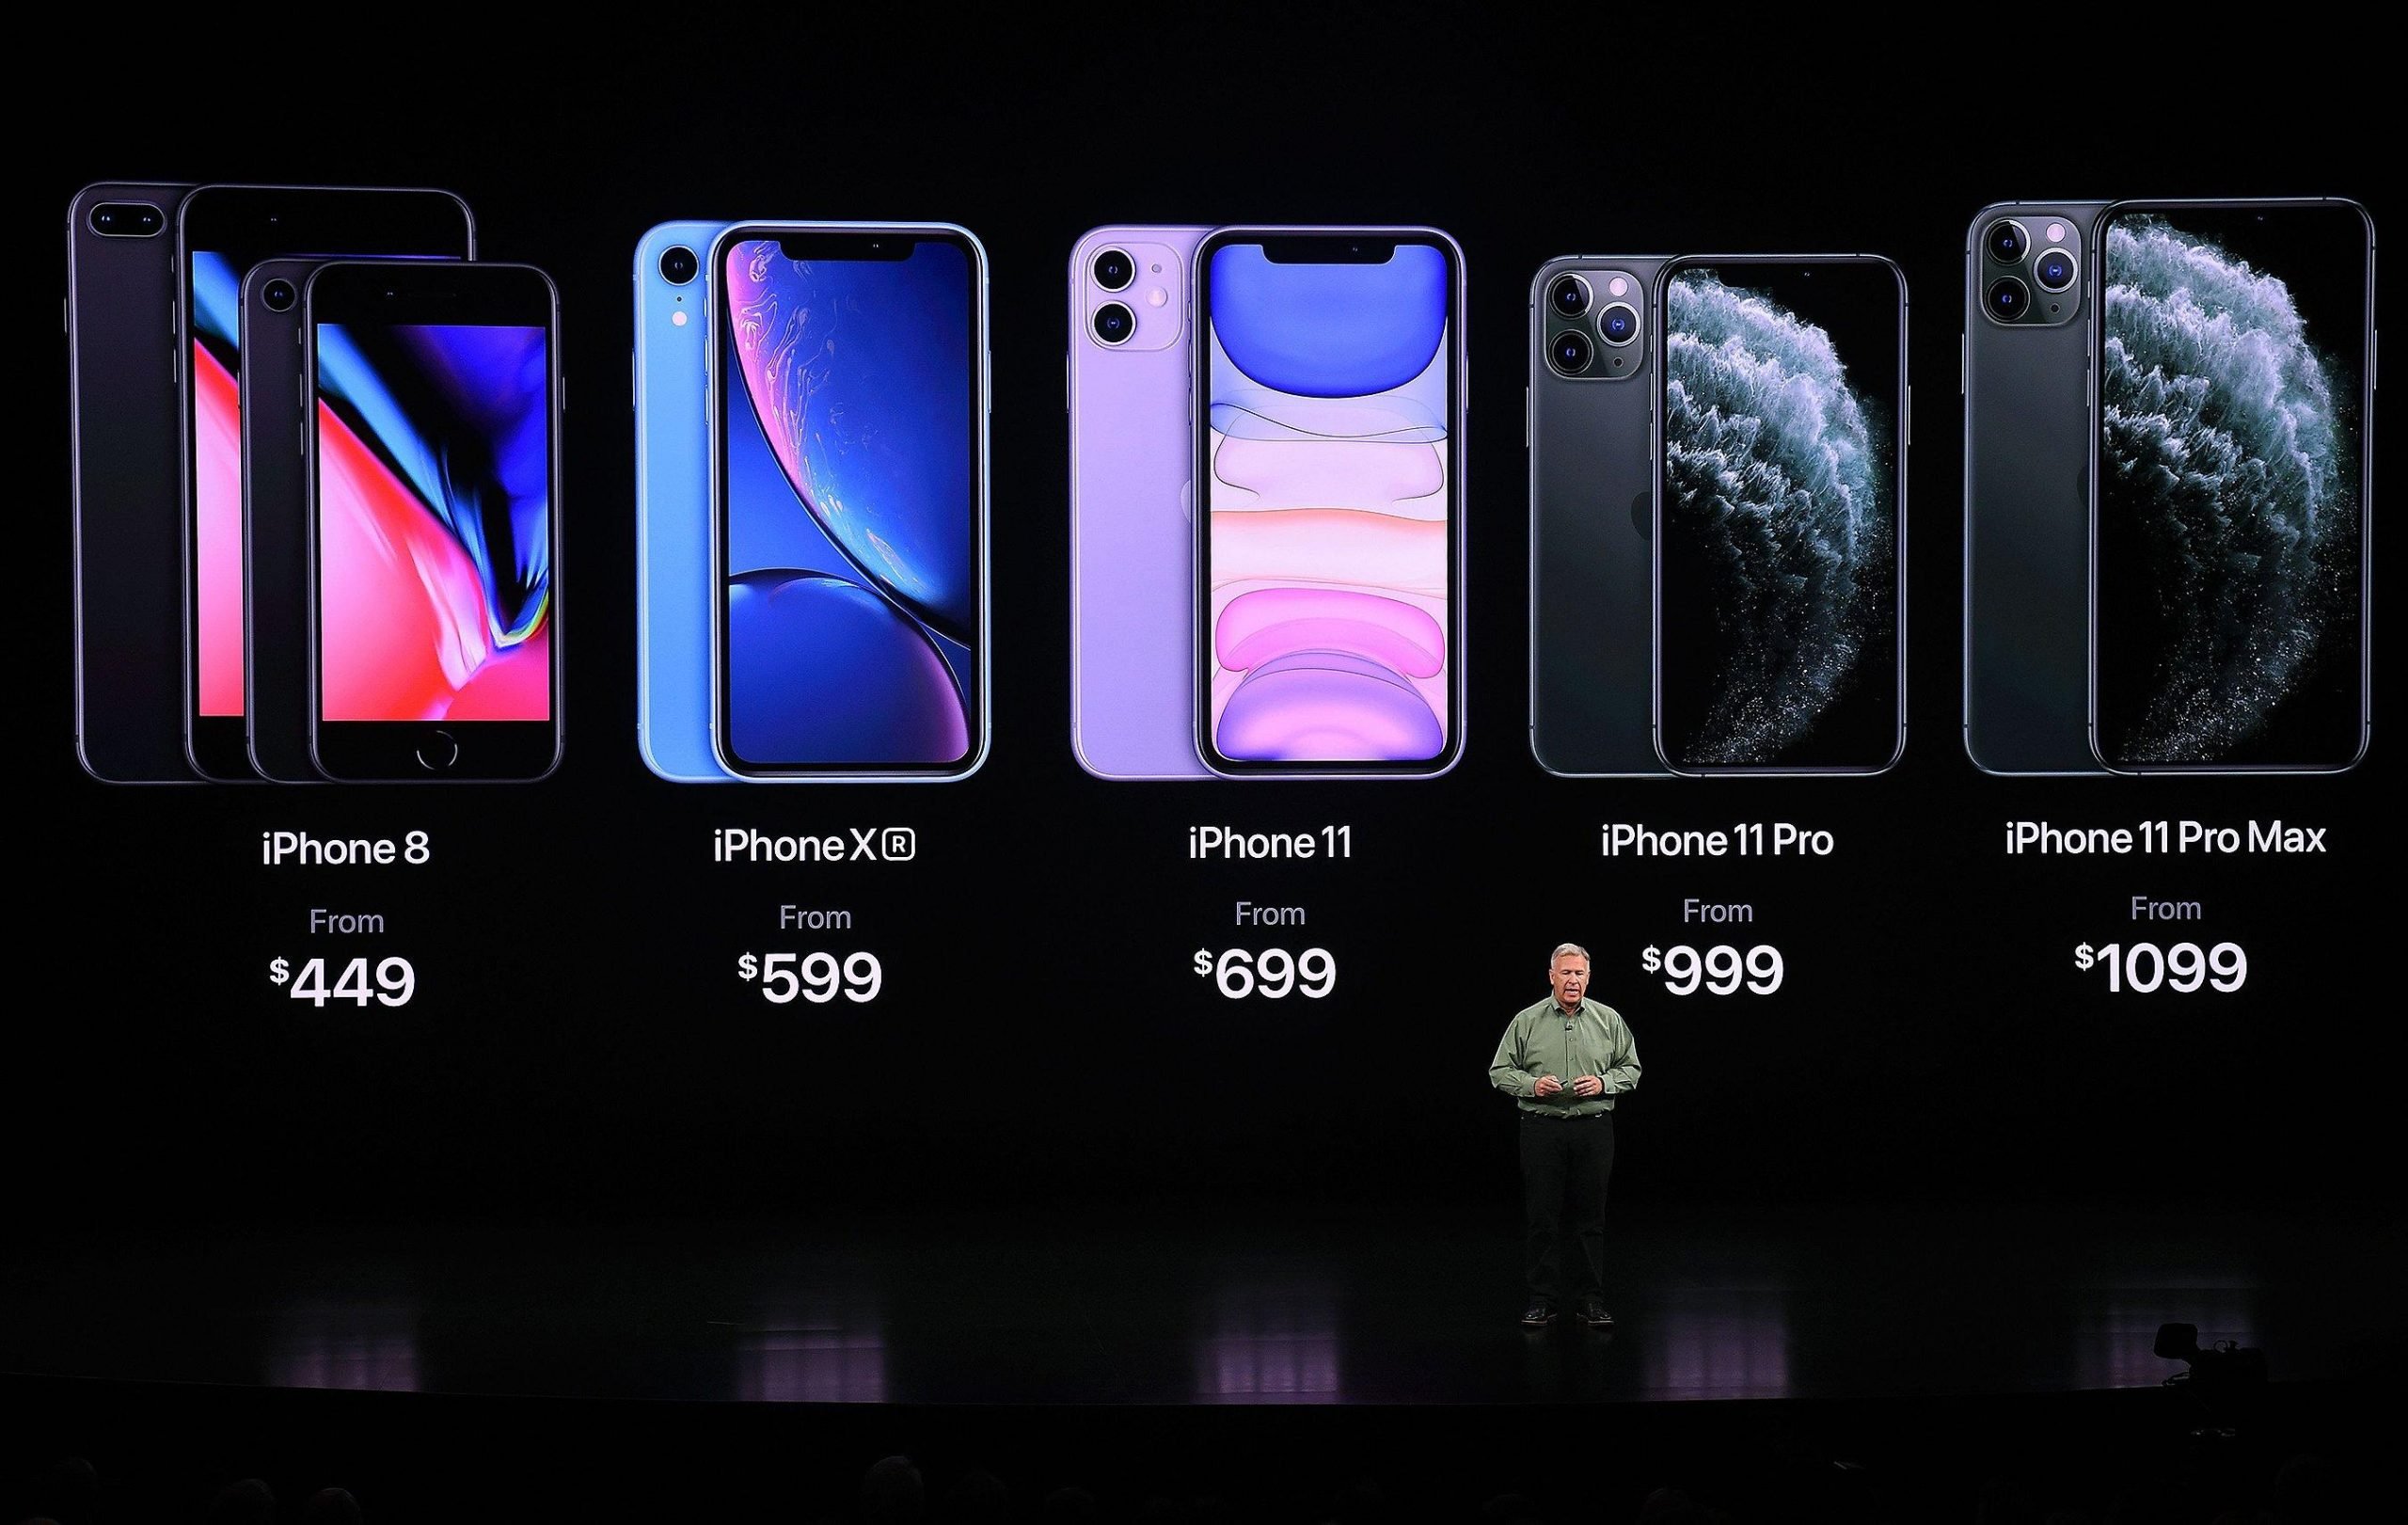 Apple Announces New iPhones Costing $699  Here Are the ...